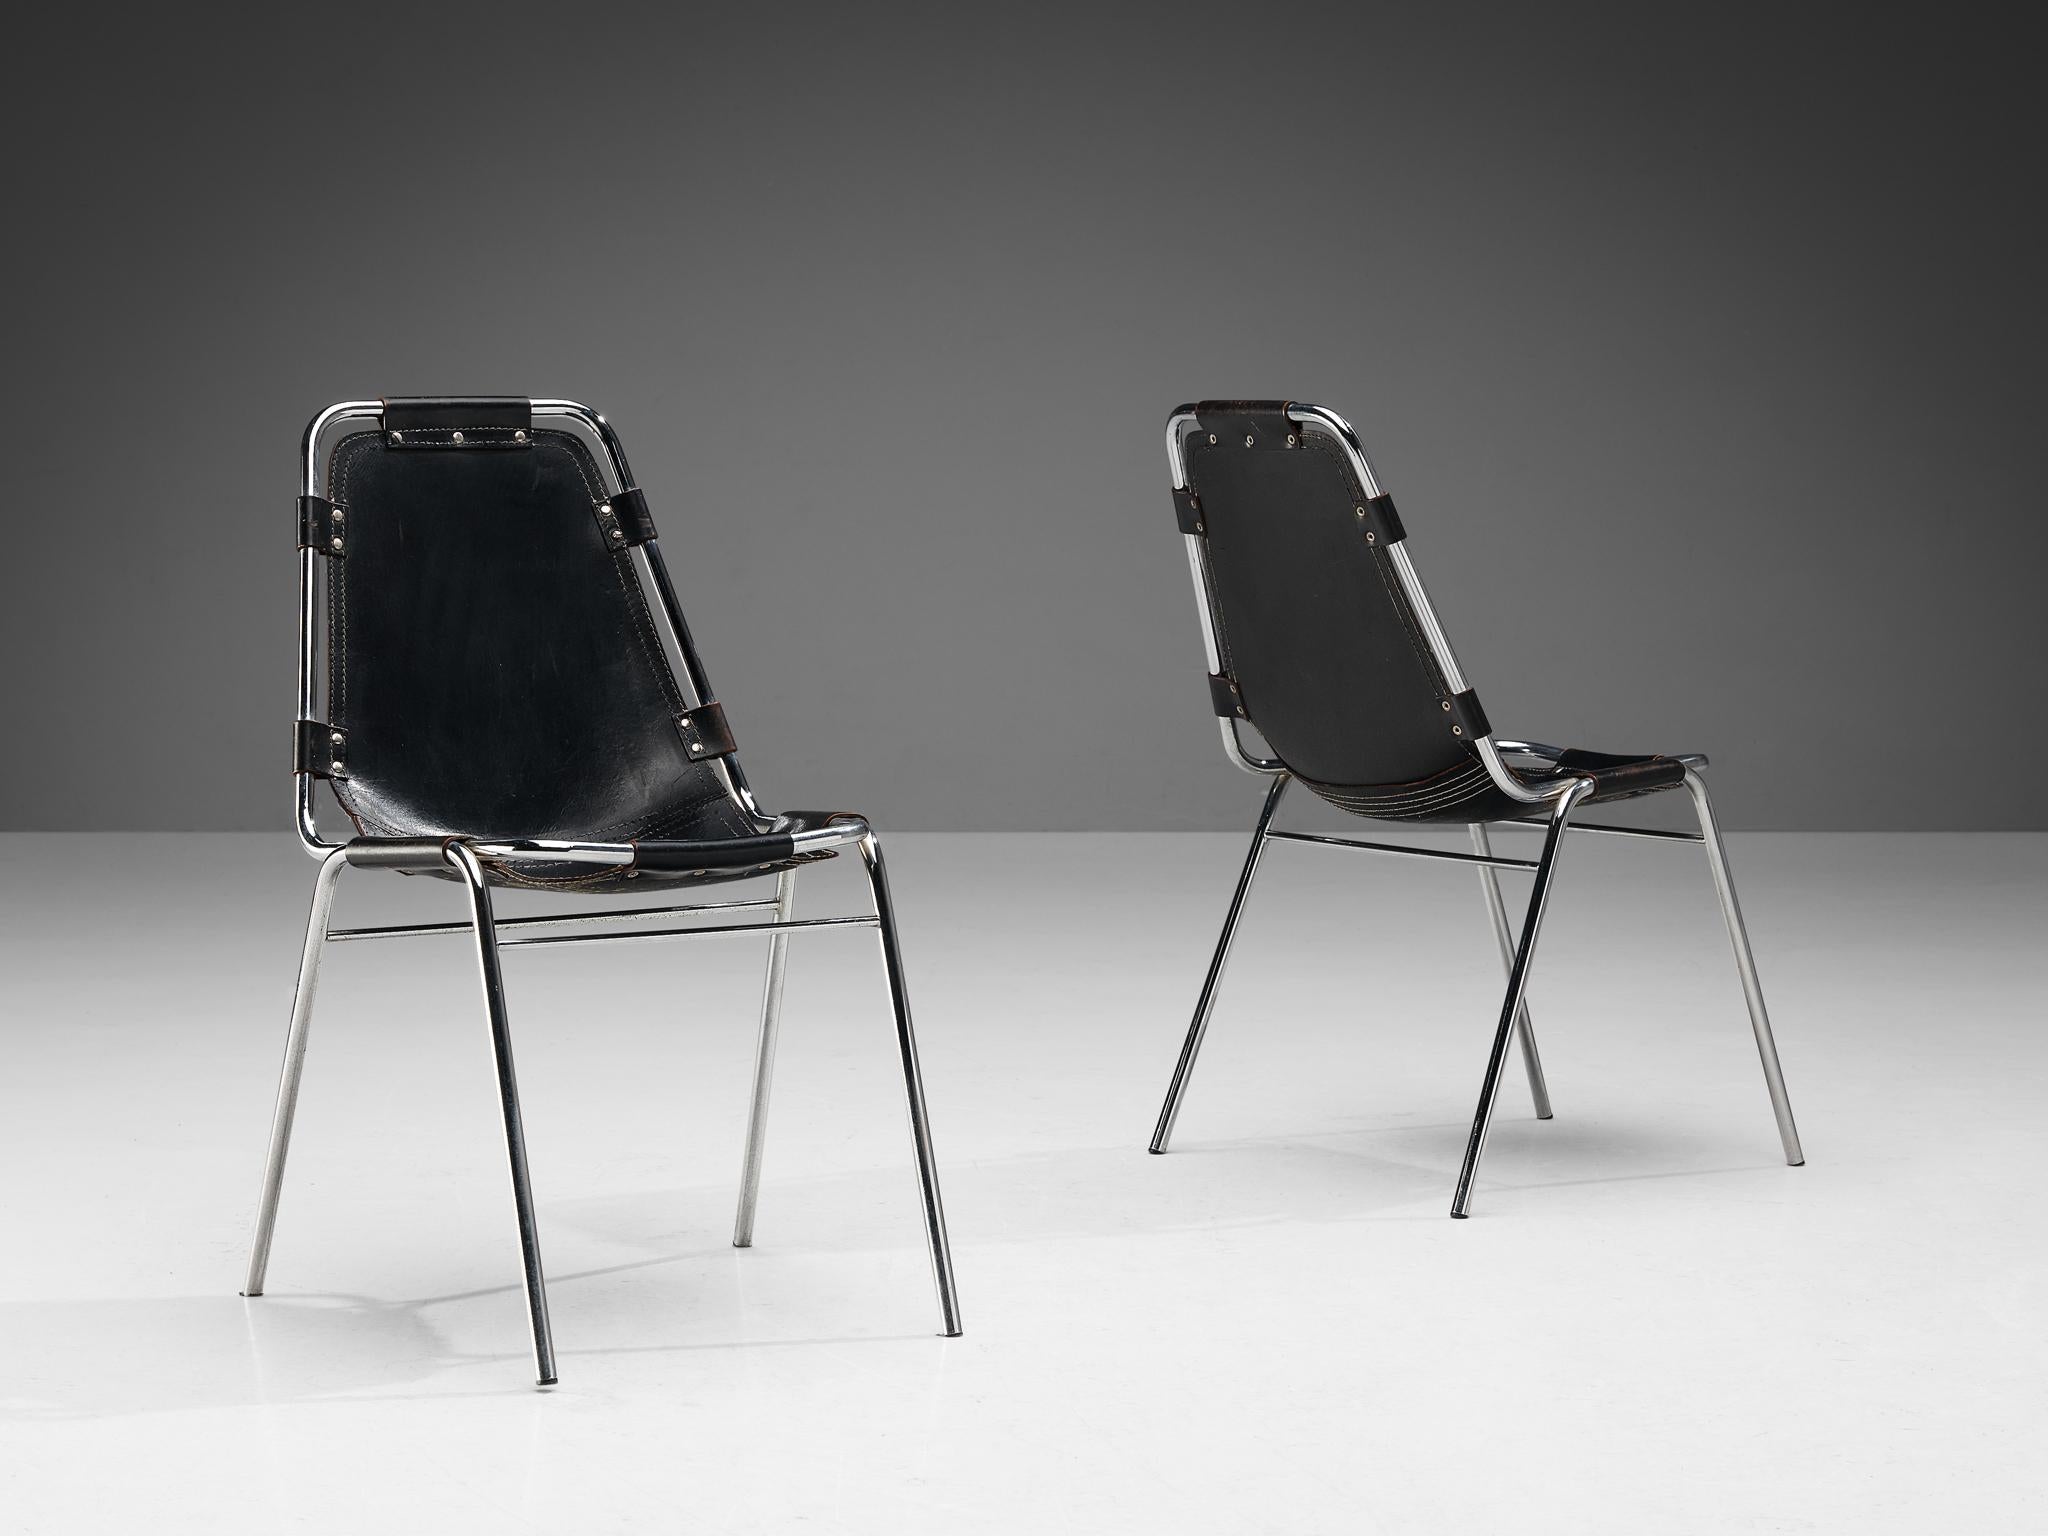 Dal Vera pair of 'Les Arcs' chairs, selected by Charlotte Perriand, pair of dining chairs model 'Les Arcs', black leather, chrome-plated metal, circa. 1970 

This well-constructed pair of chairs were manufactured by Dal Vera and selected by